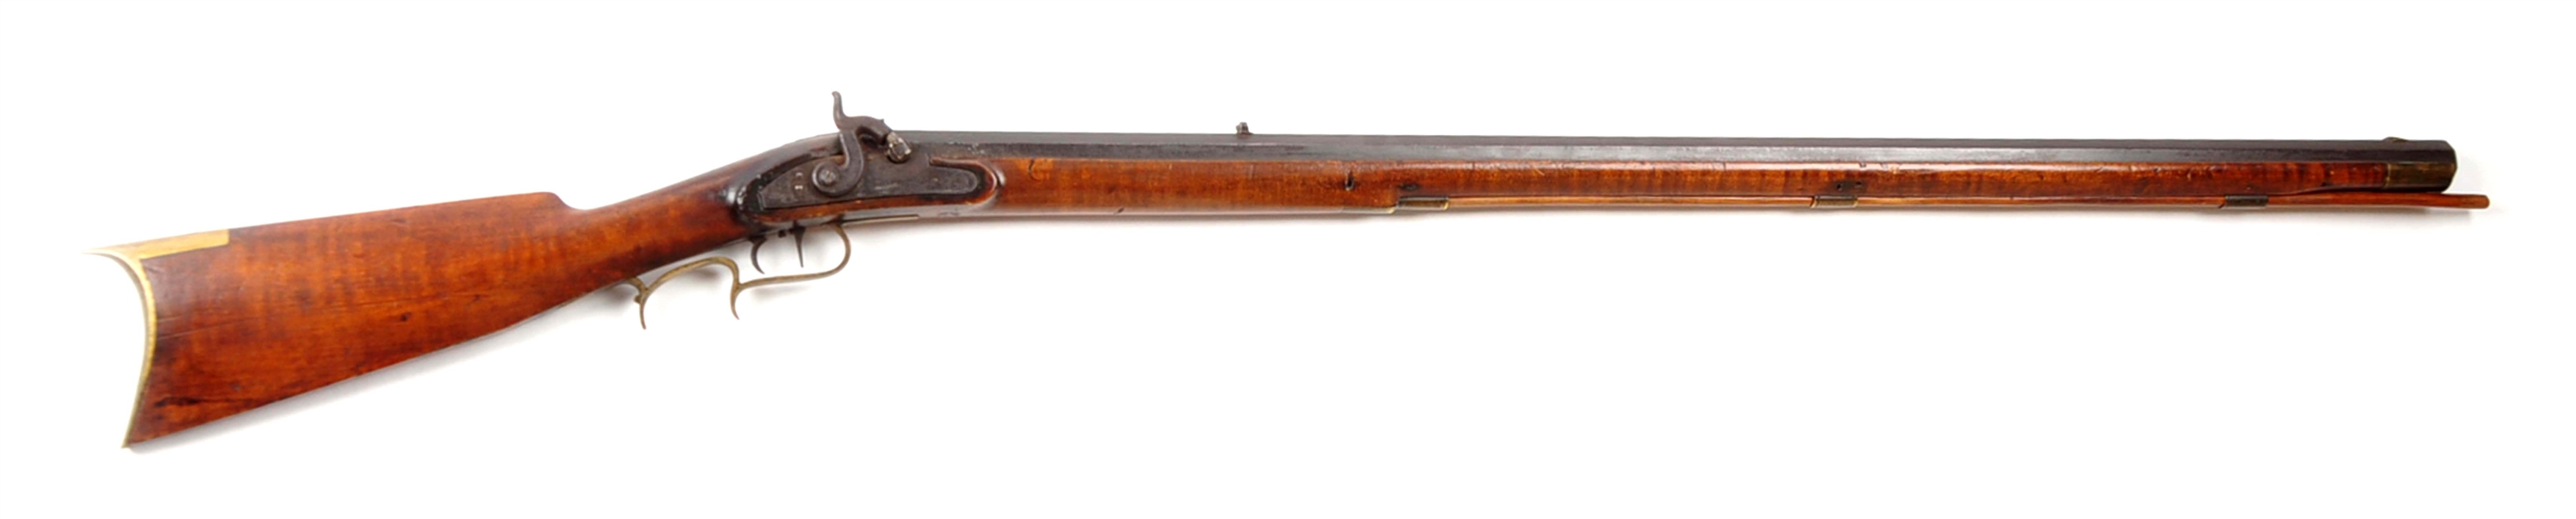 (A) KENTUCKY FULL STOCK PERCUSSION TARGET RIFLE.